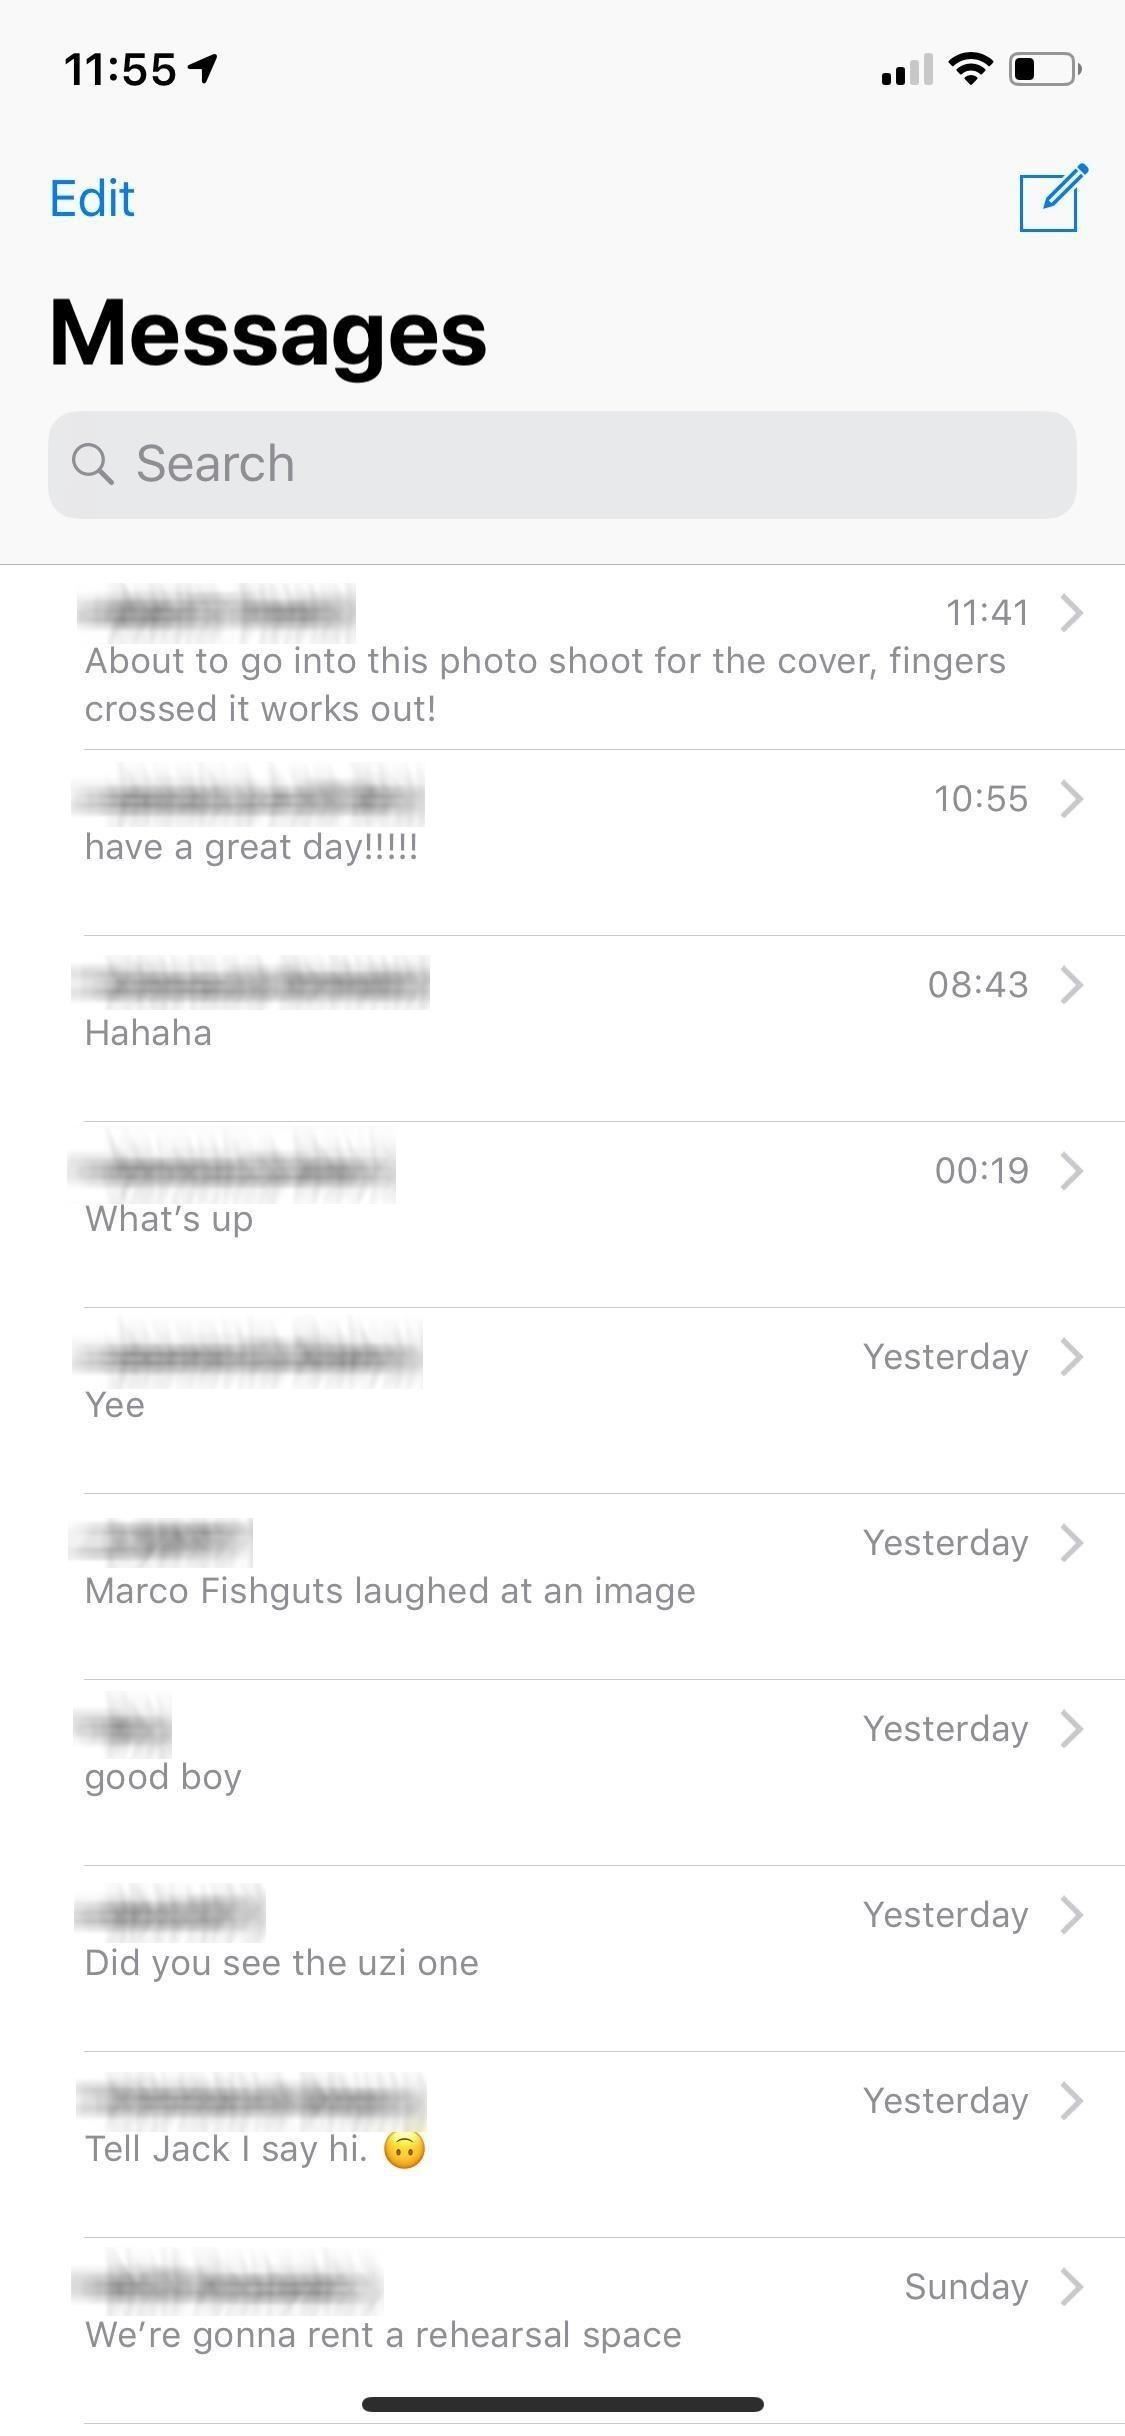 How to Hide Contact Photos from Your Apple Messages List & Conversations to Declutter the Interface